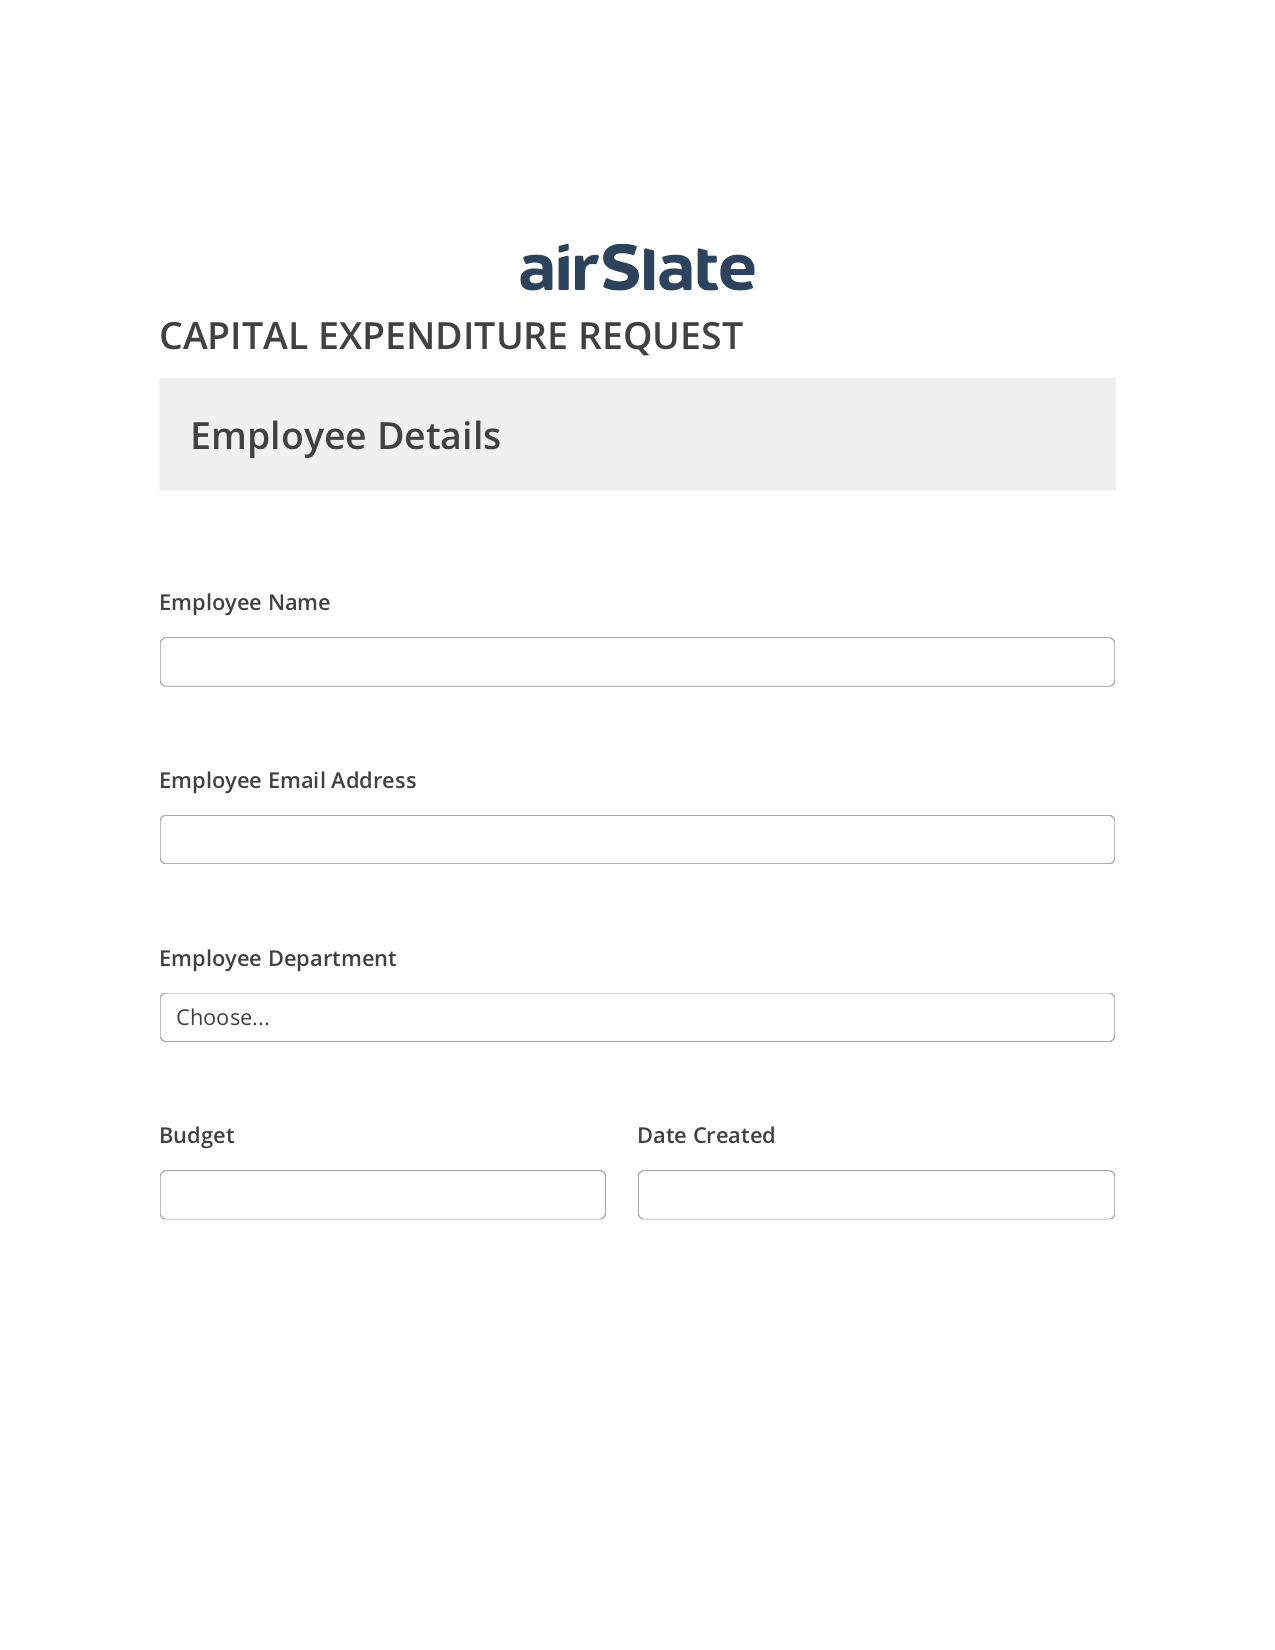 Capital Expenditure Request Approval Workflow System Bot - Slack Two-Way Binding Bot, Lock the Slate Bot, Archive to SharePoint Folder